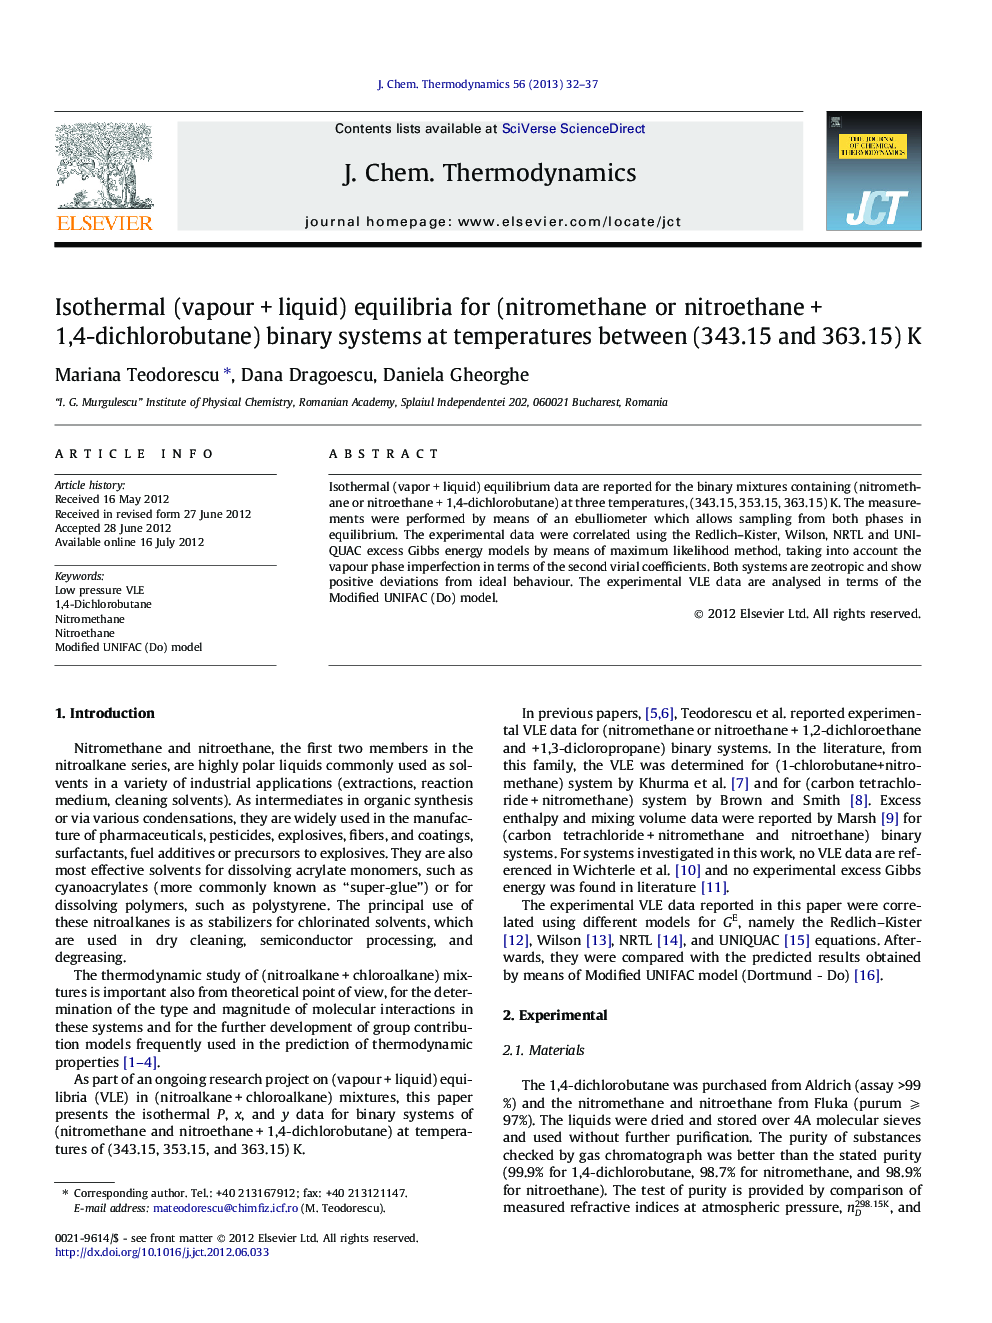 Isothermal (vapour + liquid) equilibria for (nitromethane or nitroethane + 1,4-dichlorobutane) binary systems at temperatures between (343.15 and 363.15) K